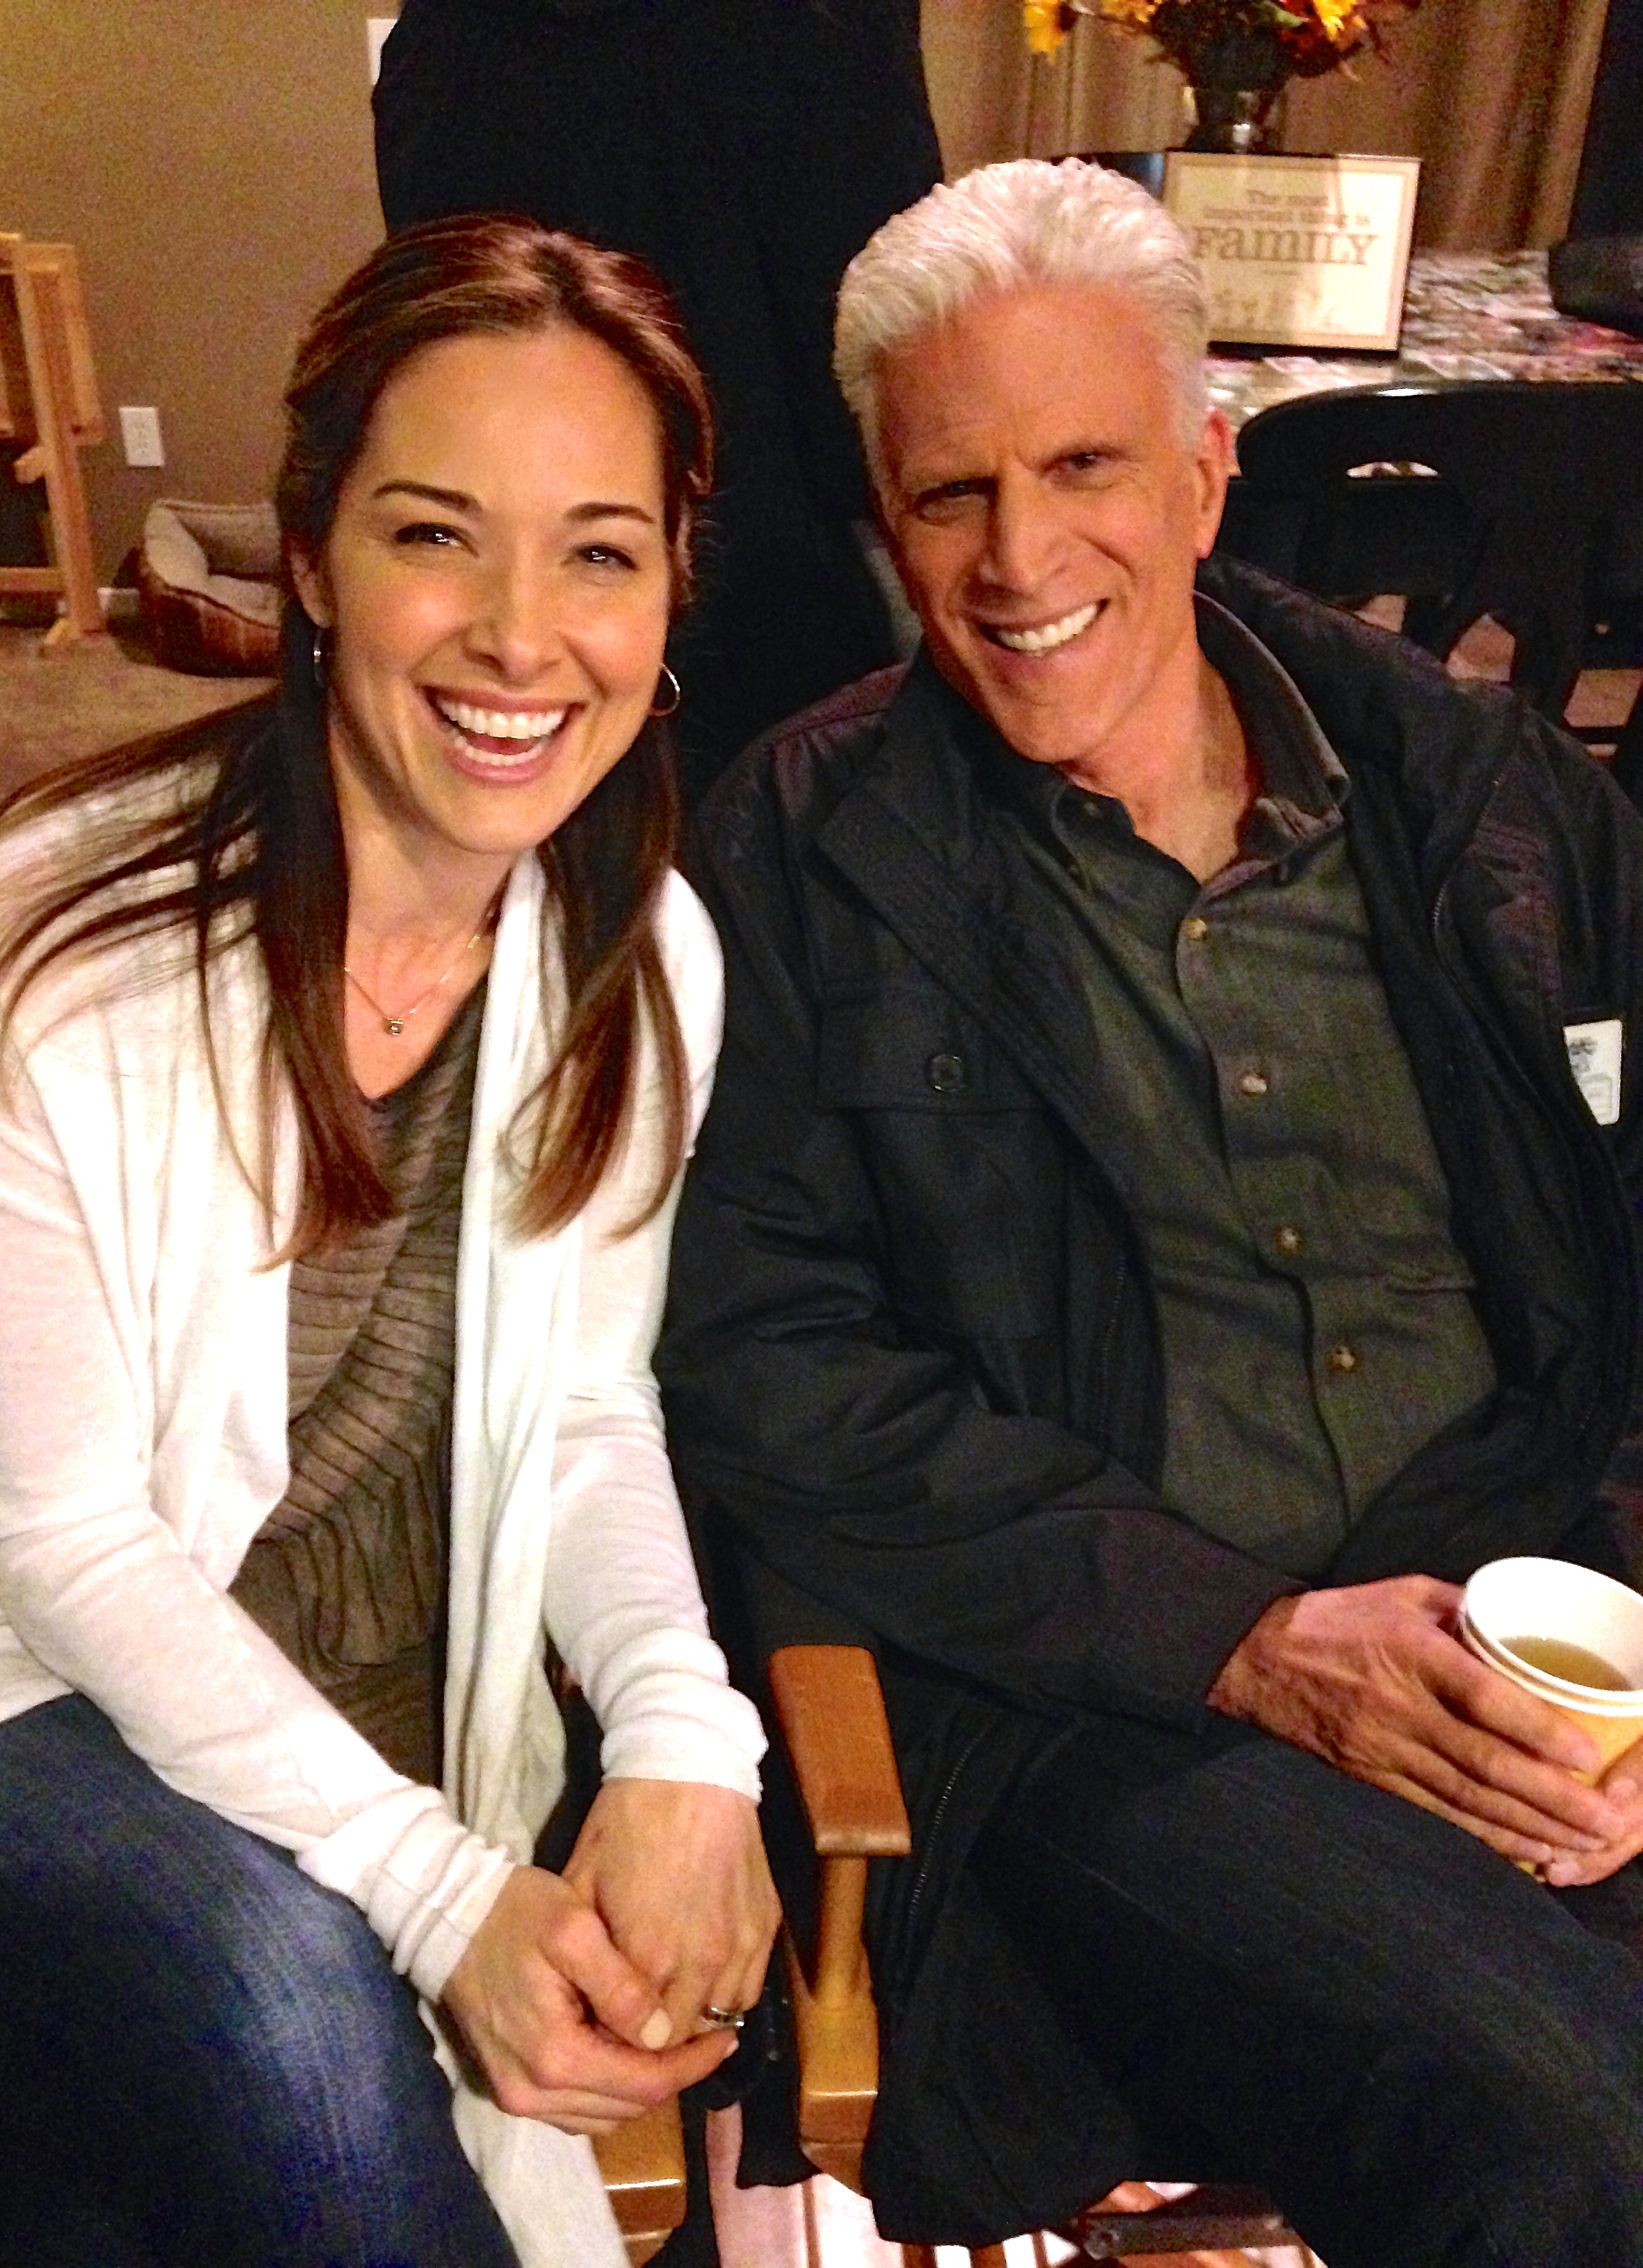 Kenda Benward (Claire Conner) and Ted Danson (D.B. Russell) on the set of 